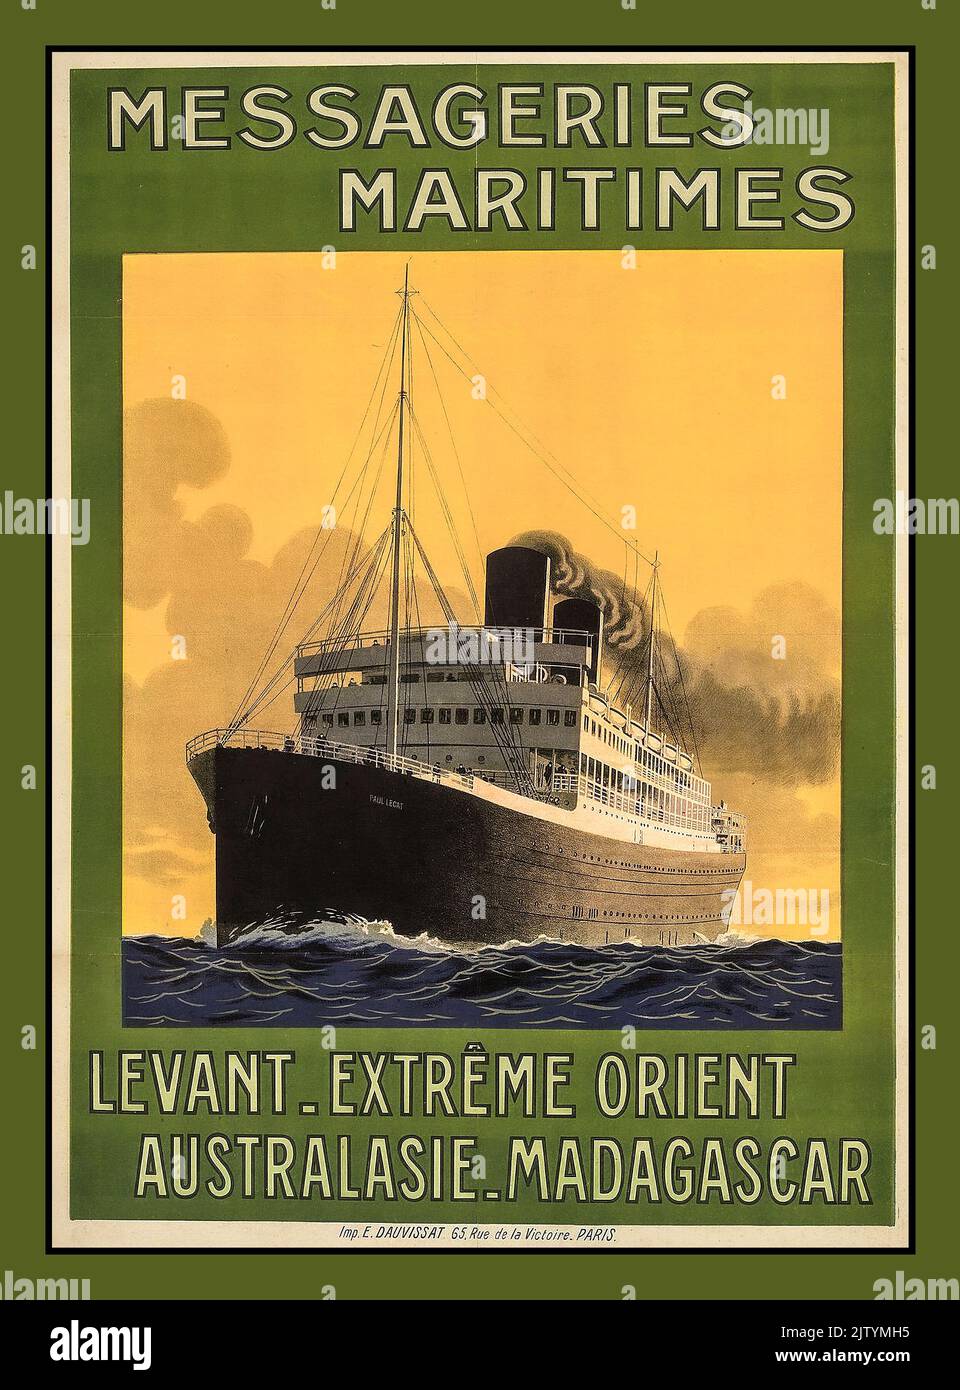 Vintage French Ocean Cruising Liner 'Messageries Maritimes' Levant-Extreme Orient-Australasie-Madagascar. Printed and Produced in Paris France Stock Photo